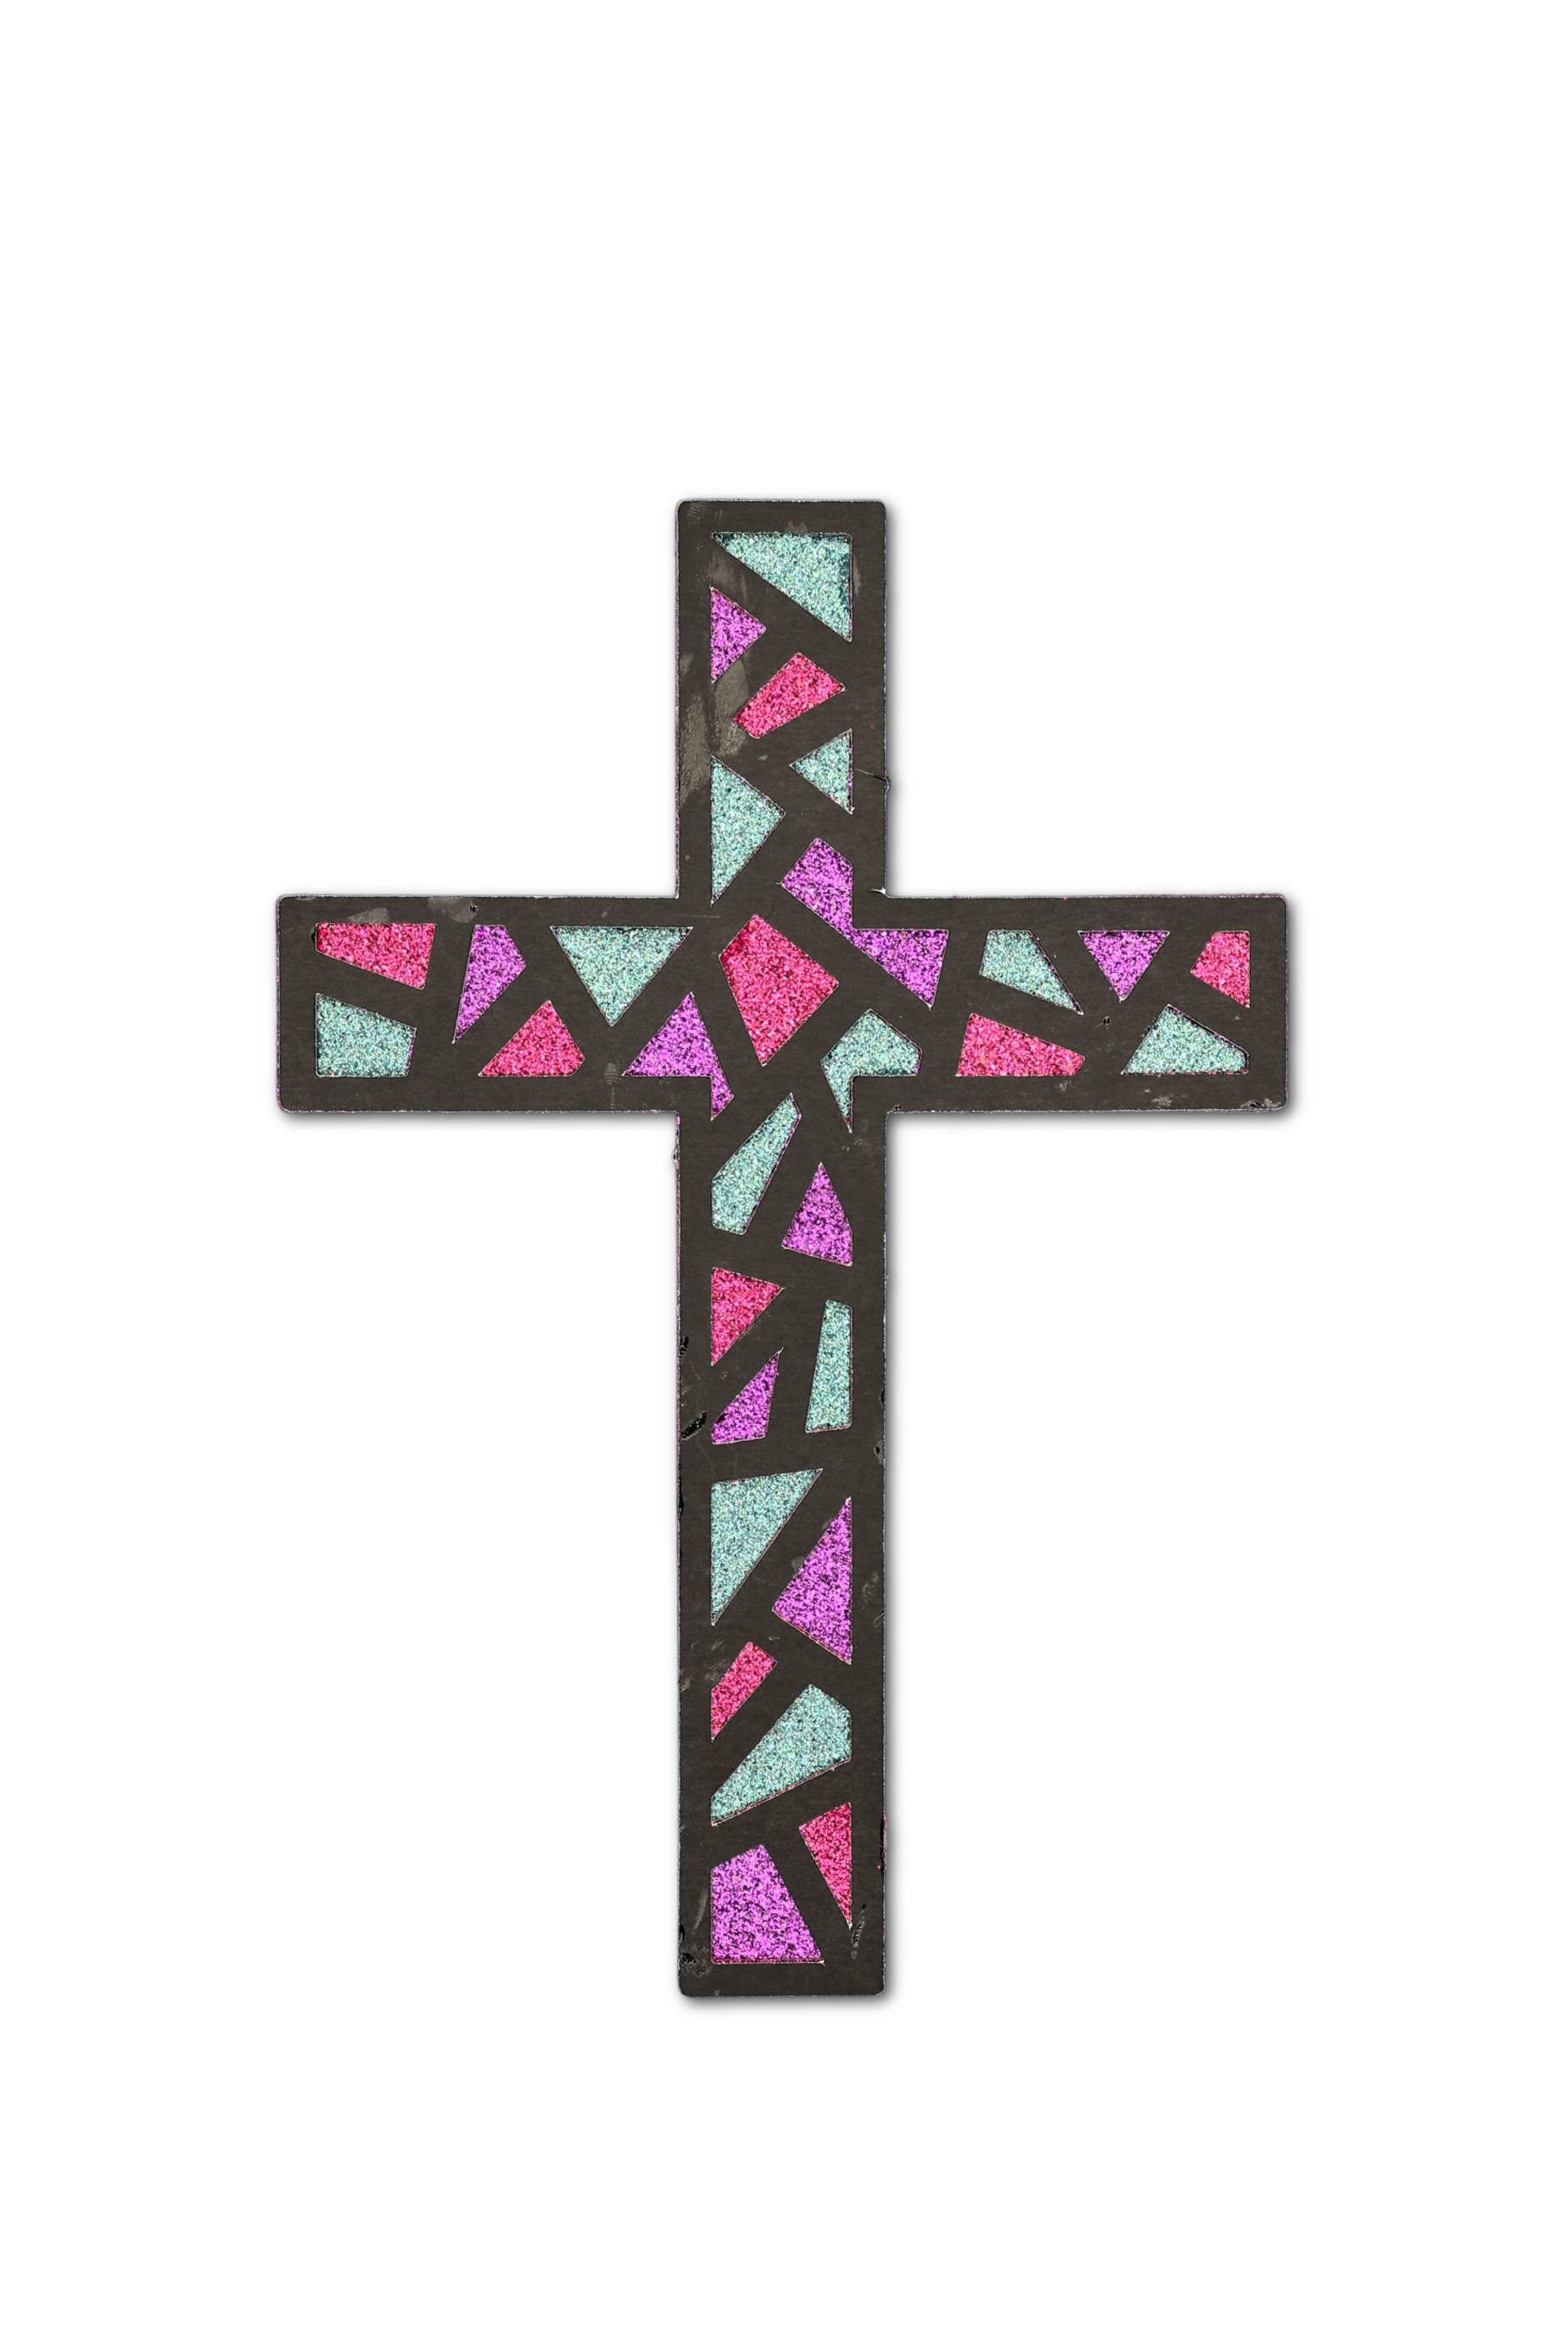 layered paper stained glass cross